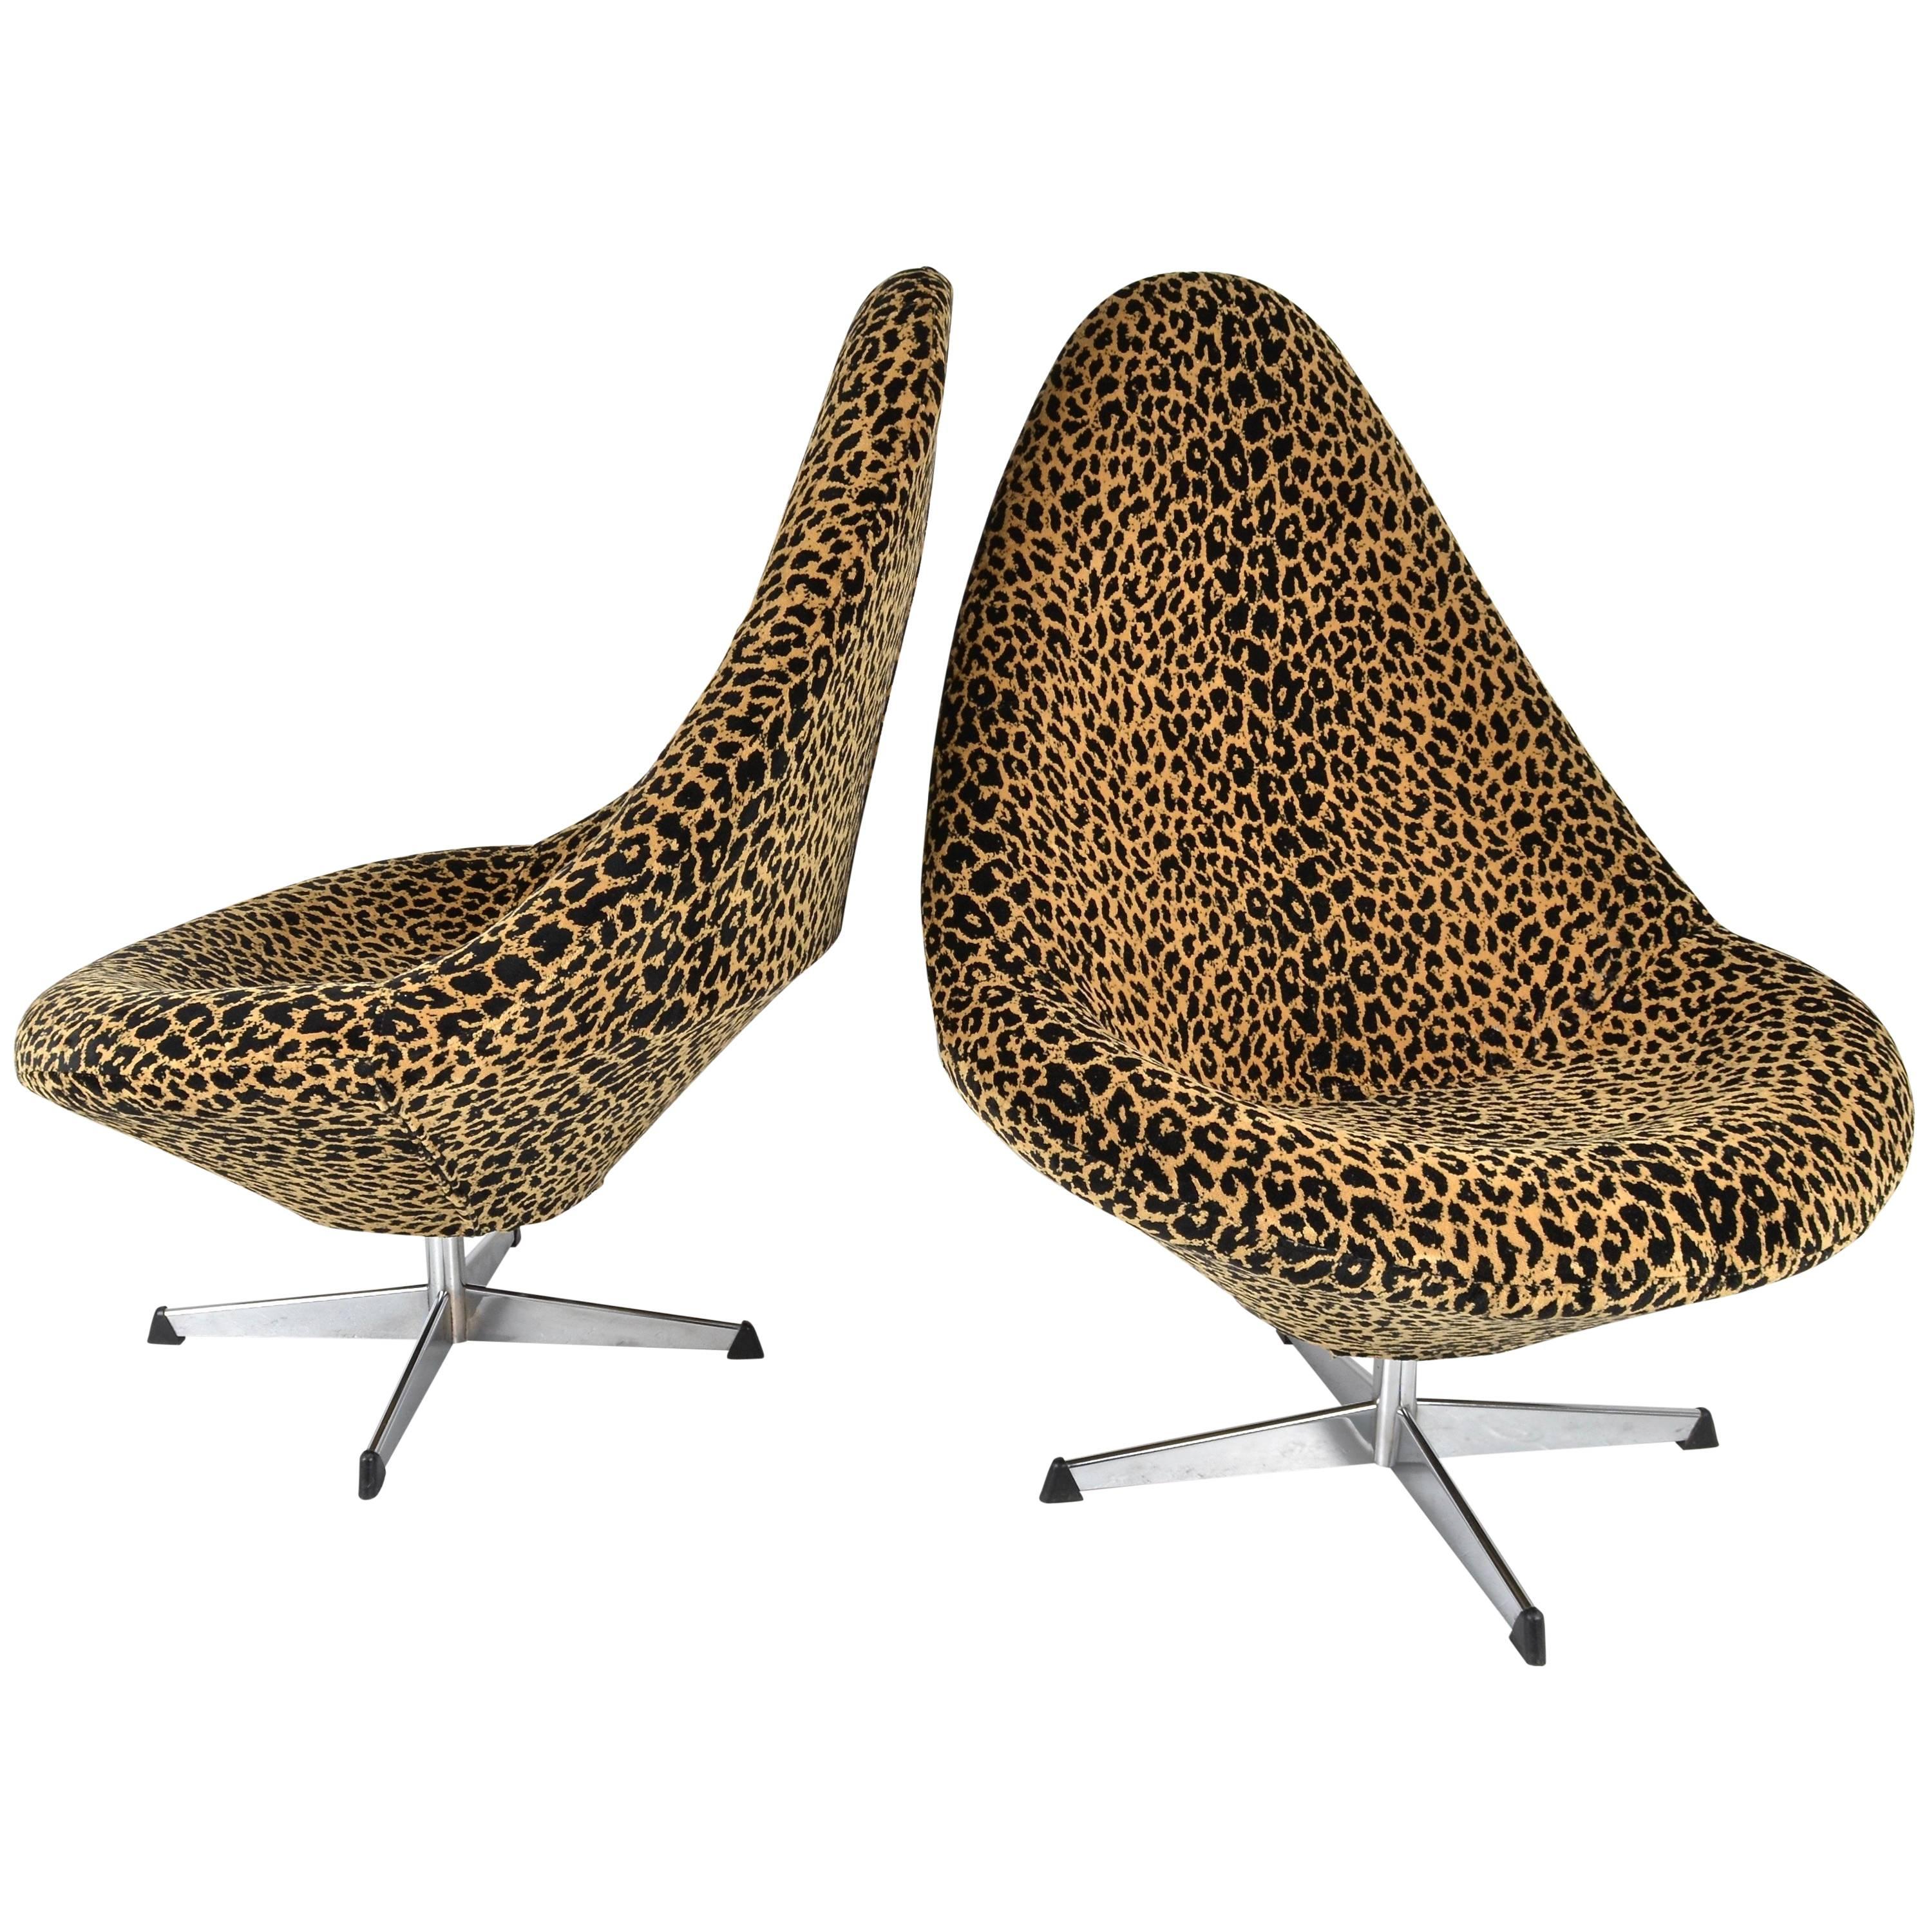 Pair of 1960s Swivel Chairs in Leopard